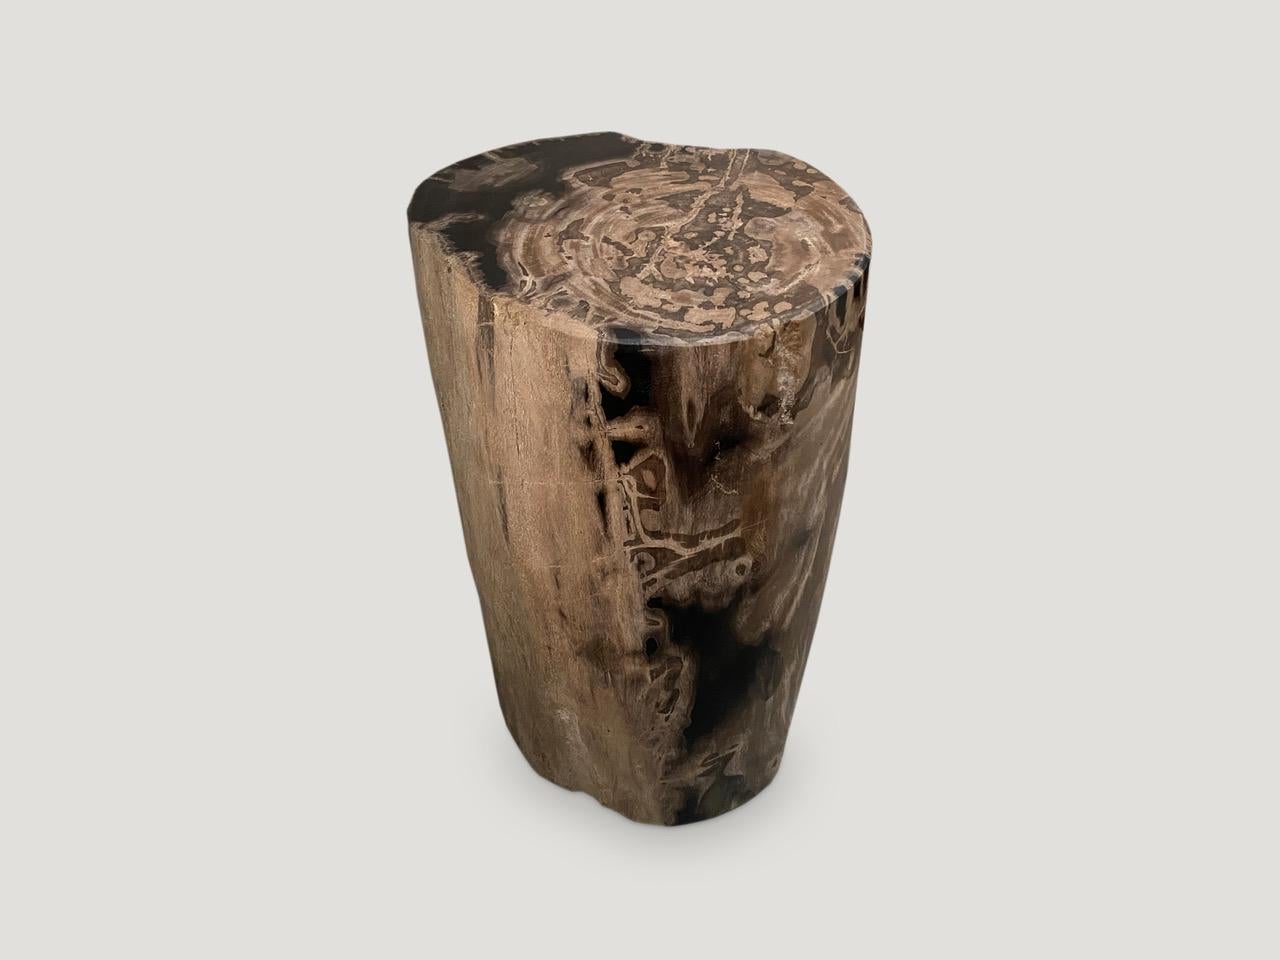 Beautiful earth tones on this high quality petrified wood side table. It’s fascinating how Mother Nature produces these stunning 40 million year old petrified teak logs with such contrasting colors with natural patterns throughout. Modern yet with